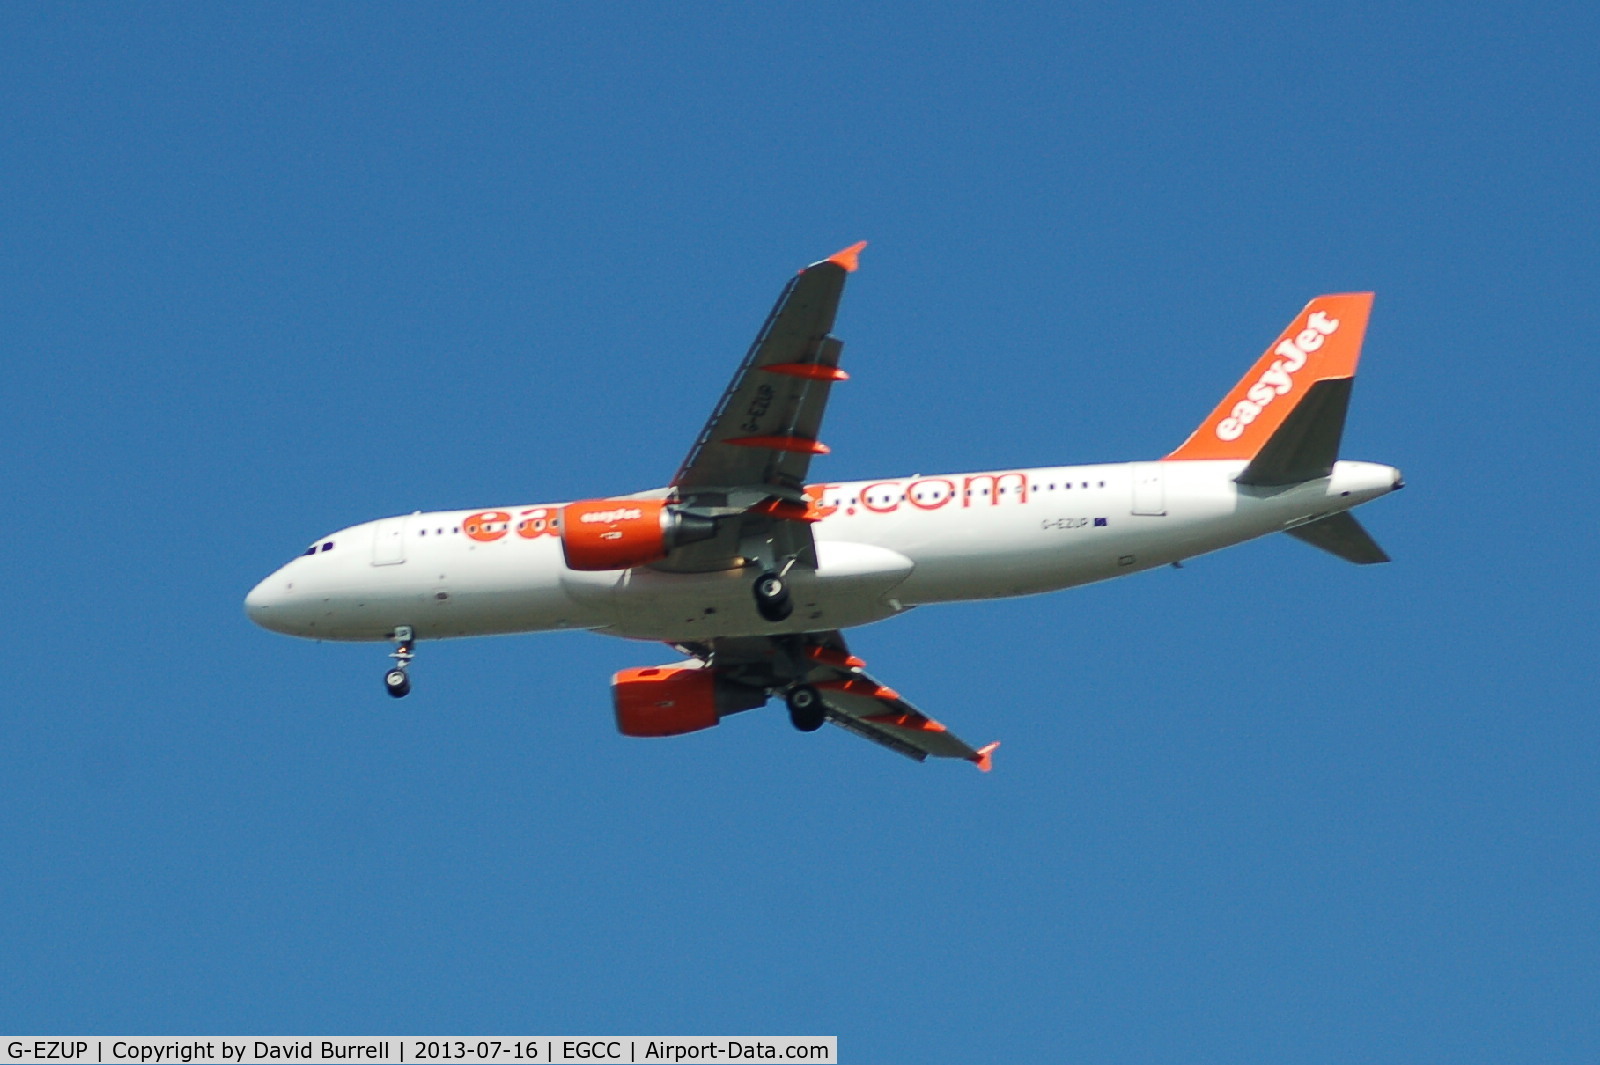 G-EZUP, 2012 Airbus A320-214 C/N 5056, Easyjet Airbus A320 G-EZUP On approach to Manchester Airport.